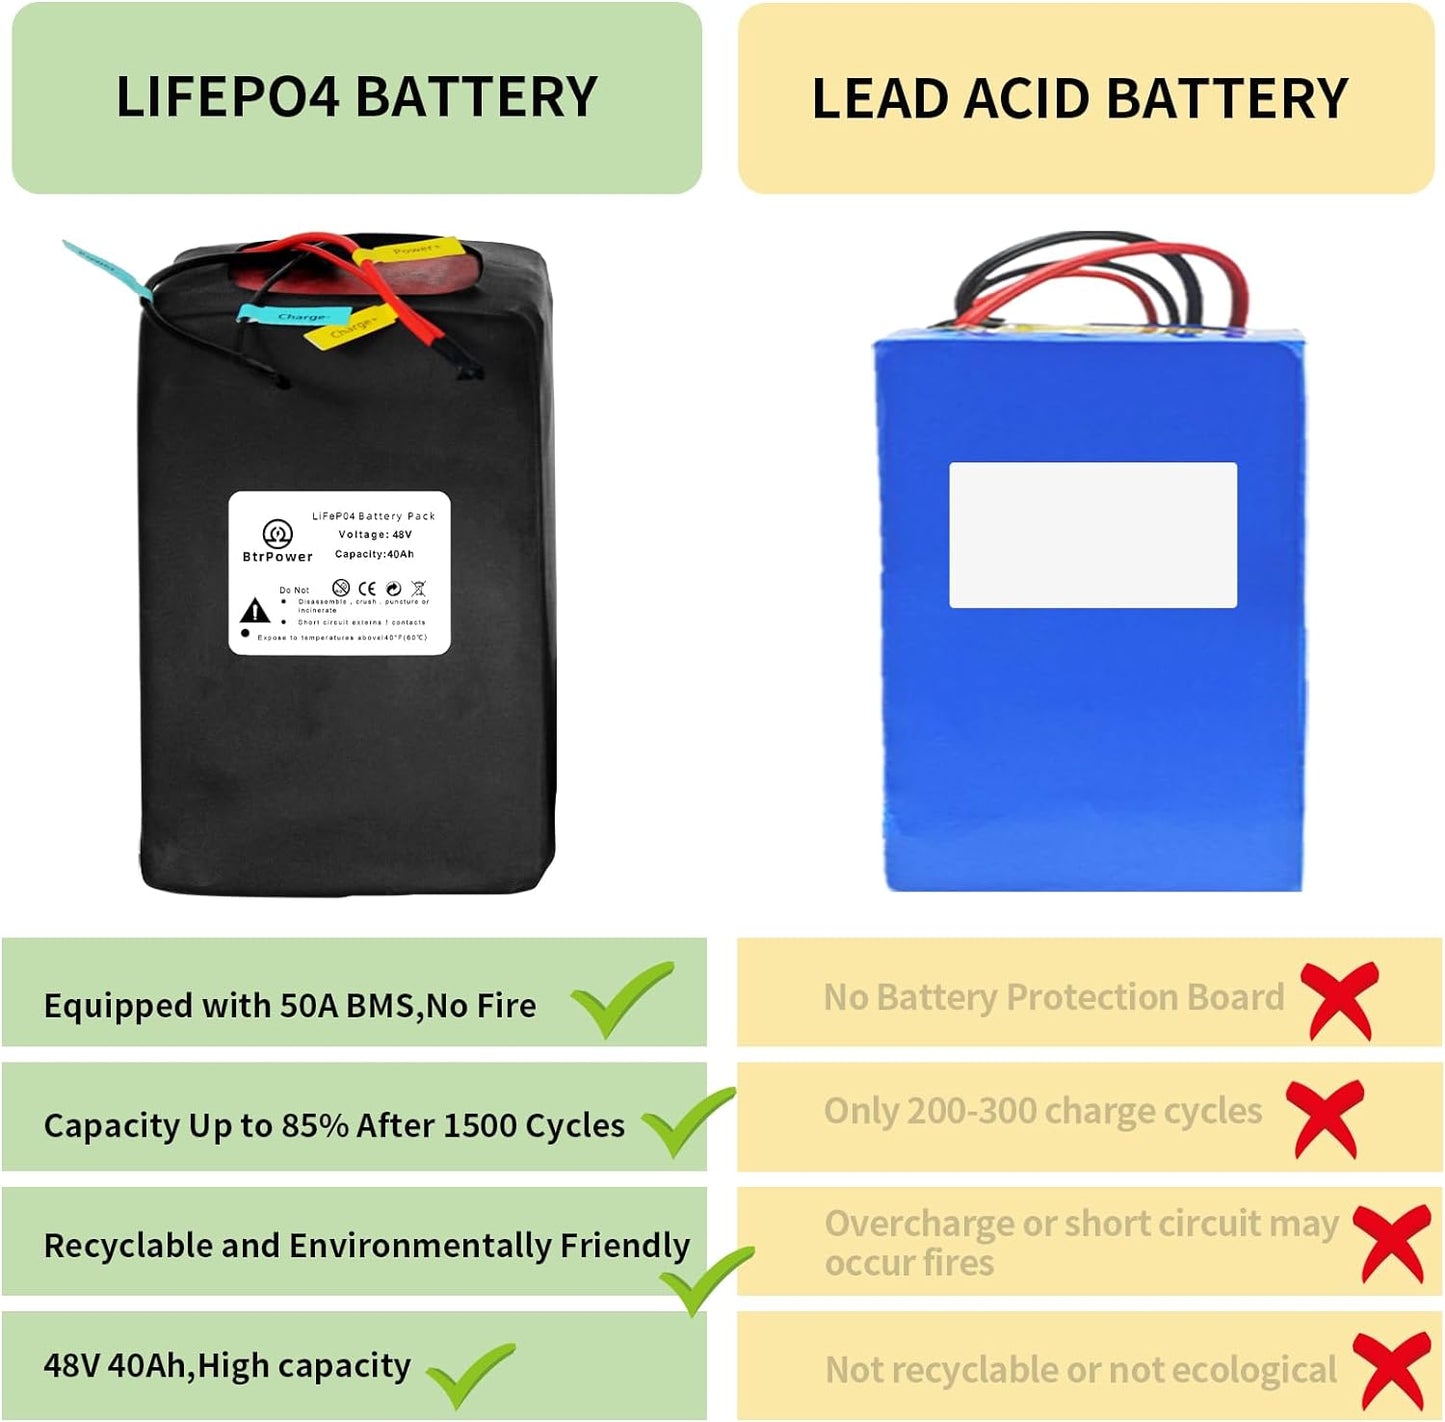 BtrPower Ebike Battery 48V 40AH LiFePO4 Battery Pack with 5A Charger, 50A BMS